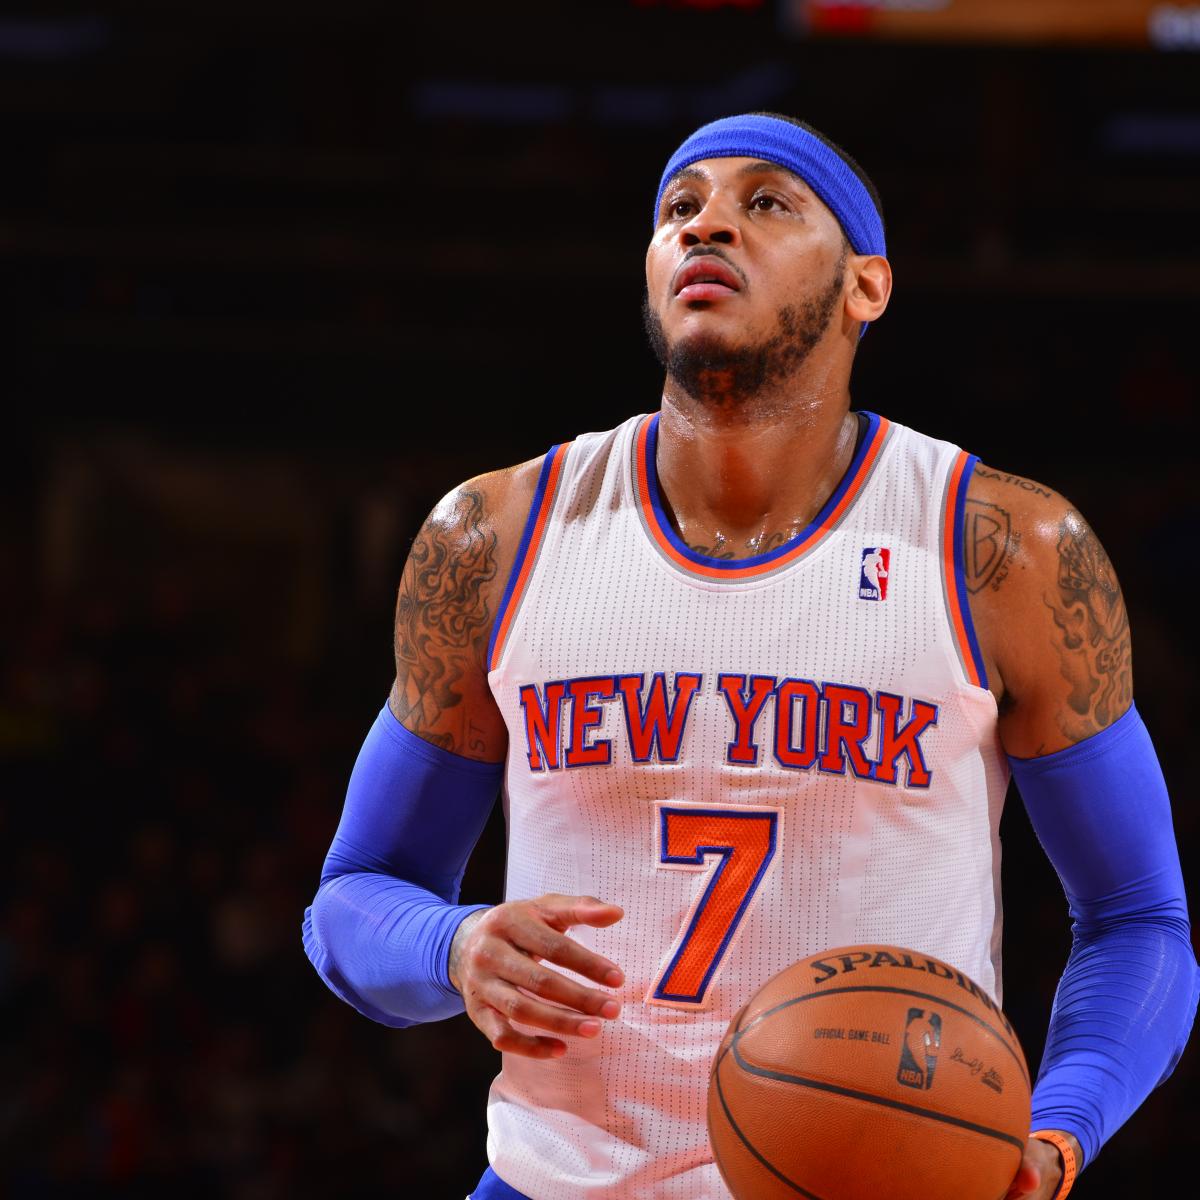 Los Angeles Lakers vs. New York Knicks: Live Score and Analysis | Bleacher Report ...